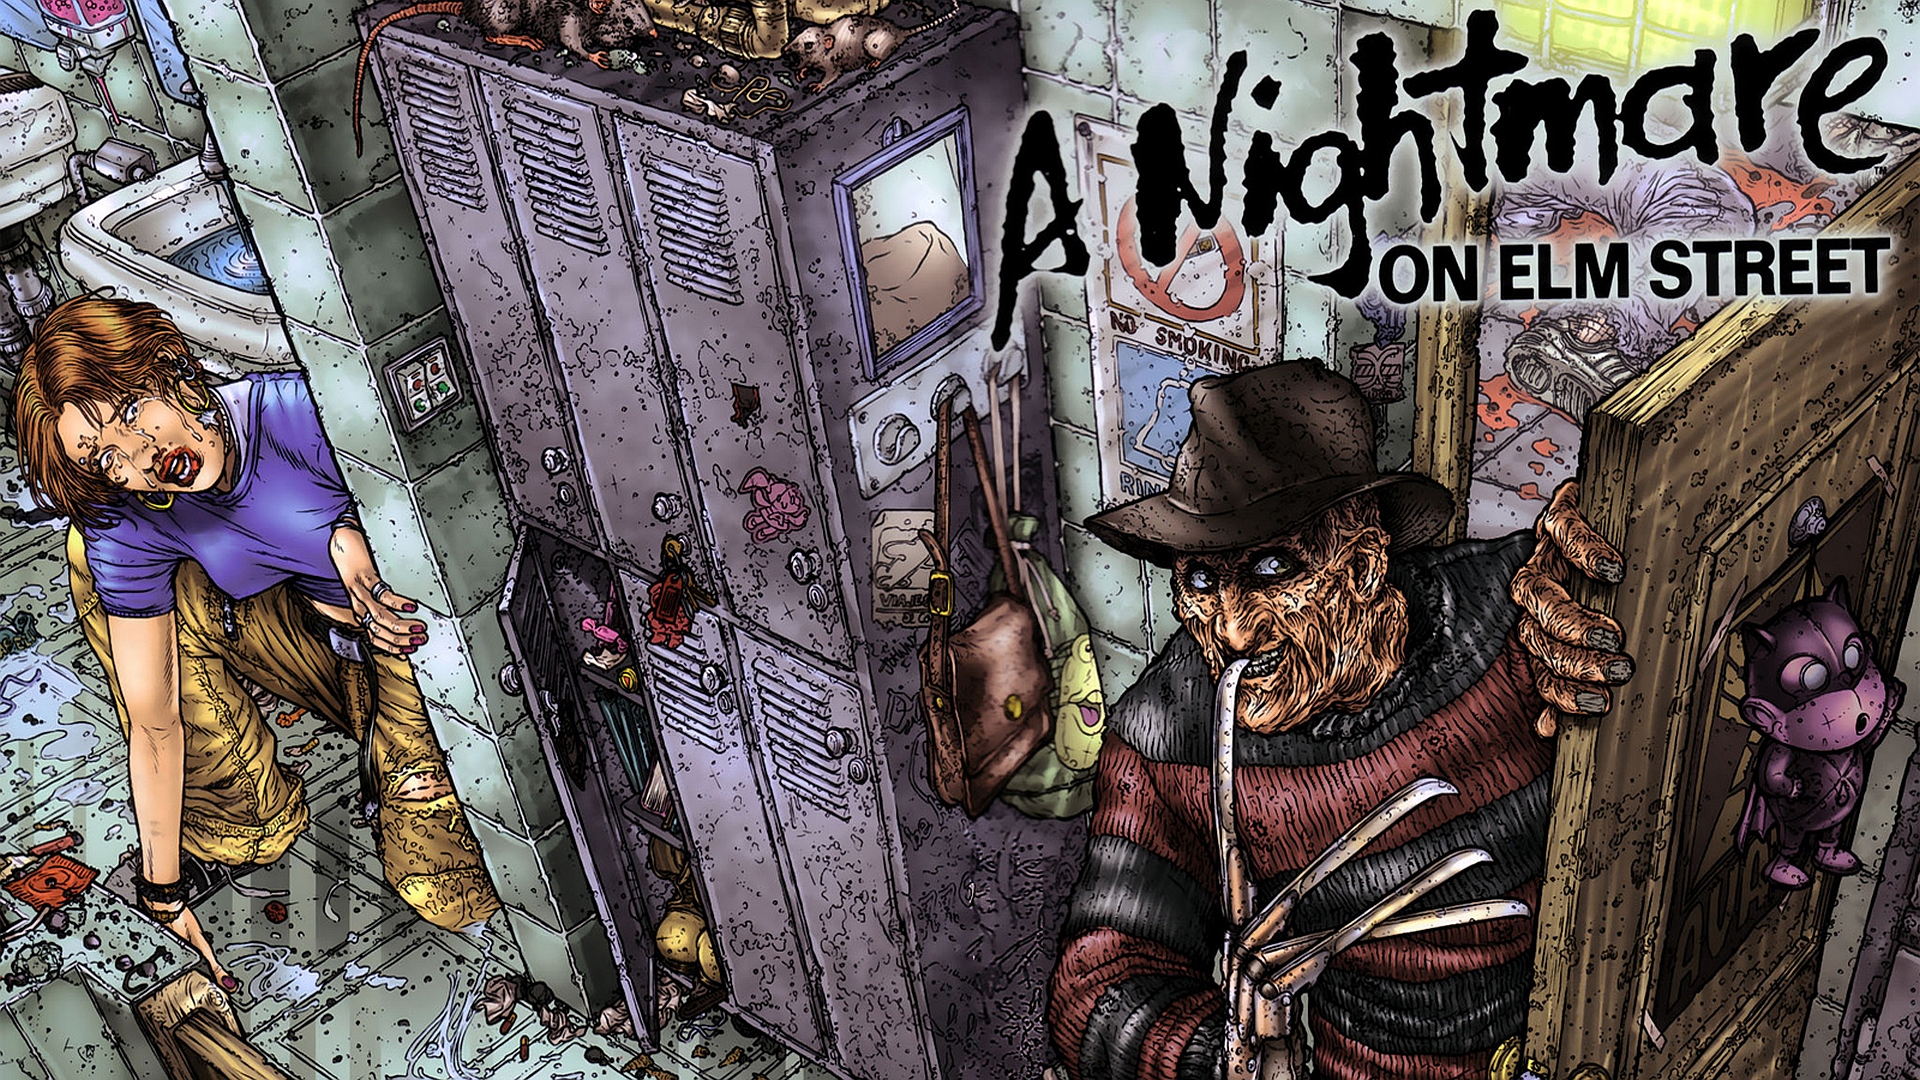 a nightmare on elm street, comics, freddy krueger for android